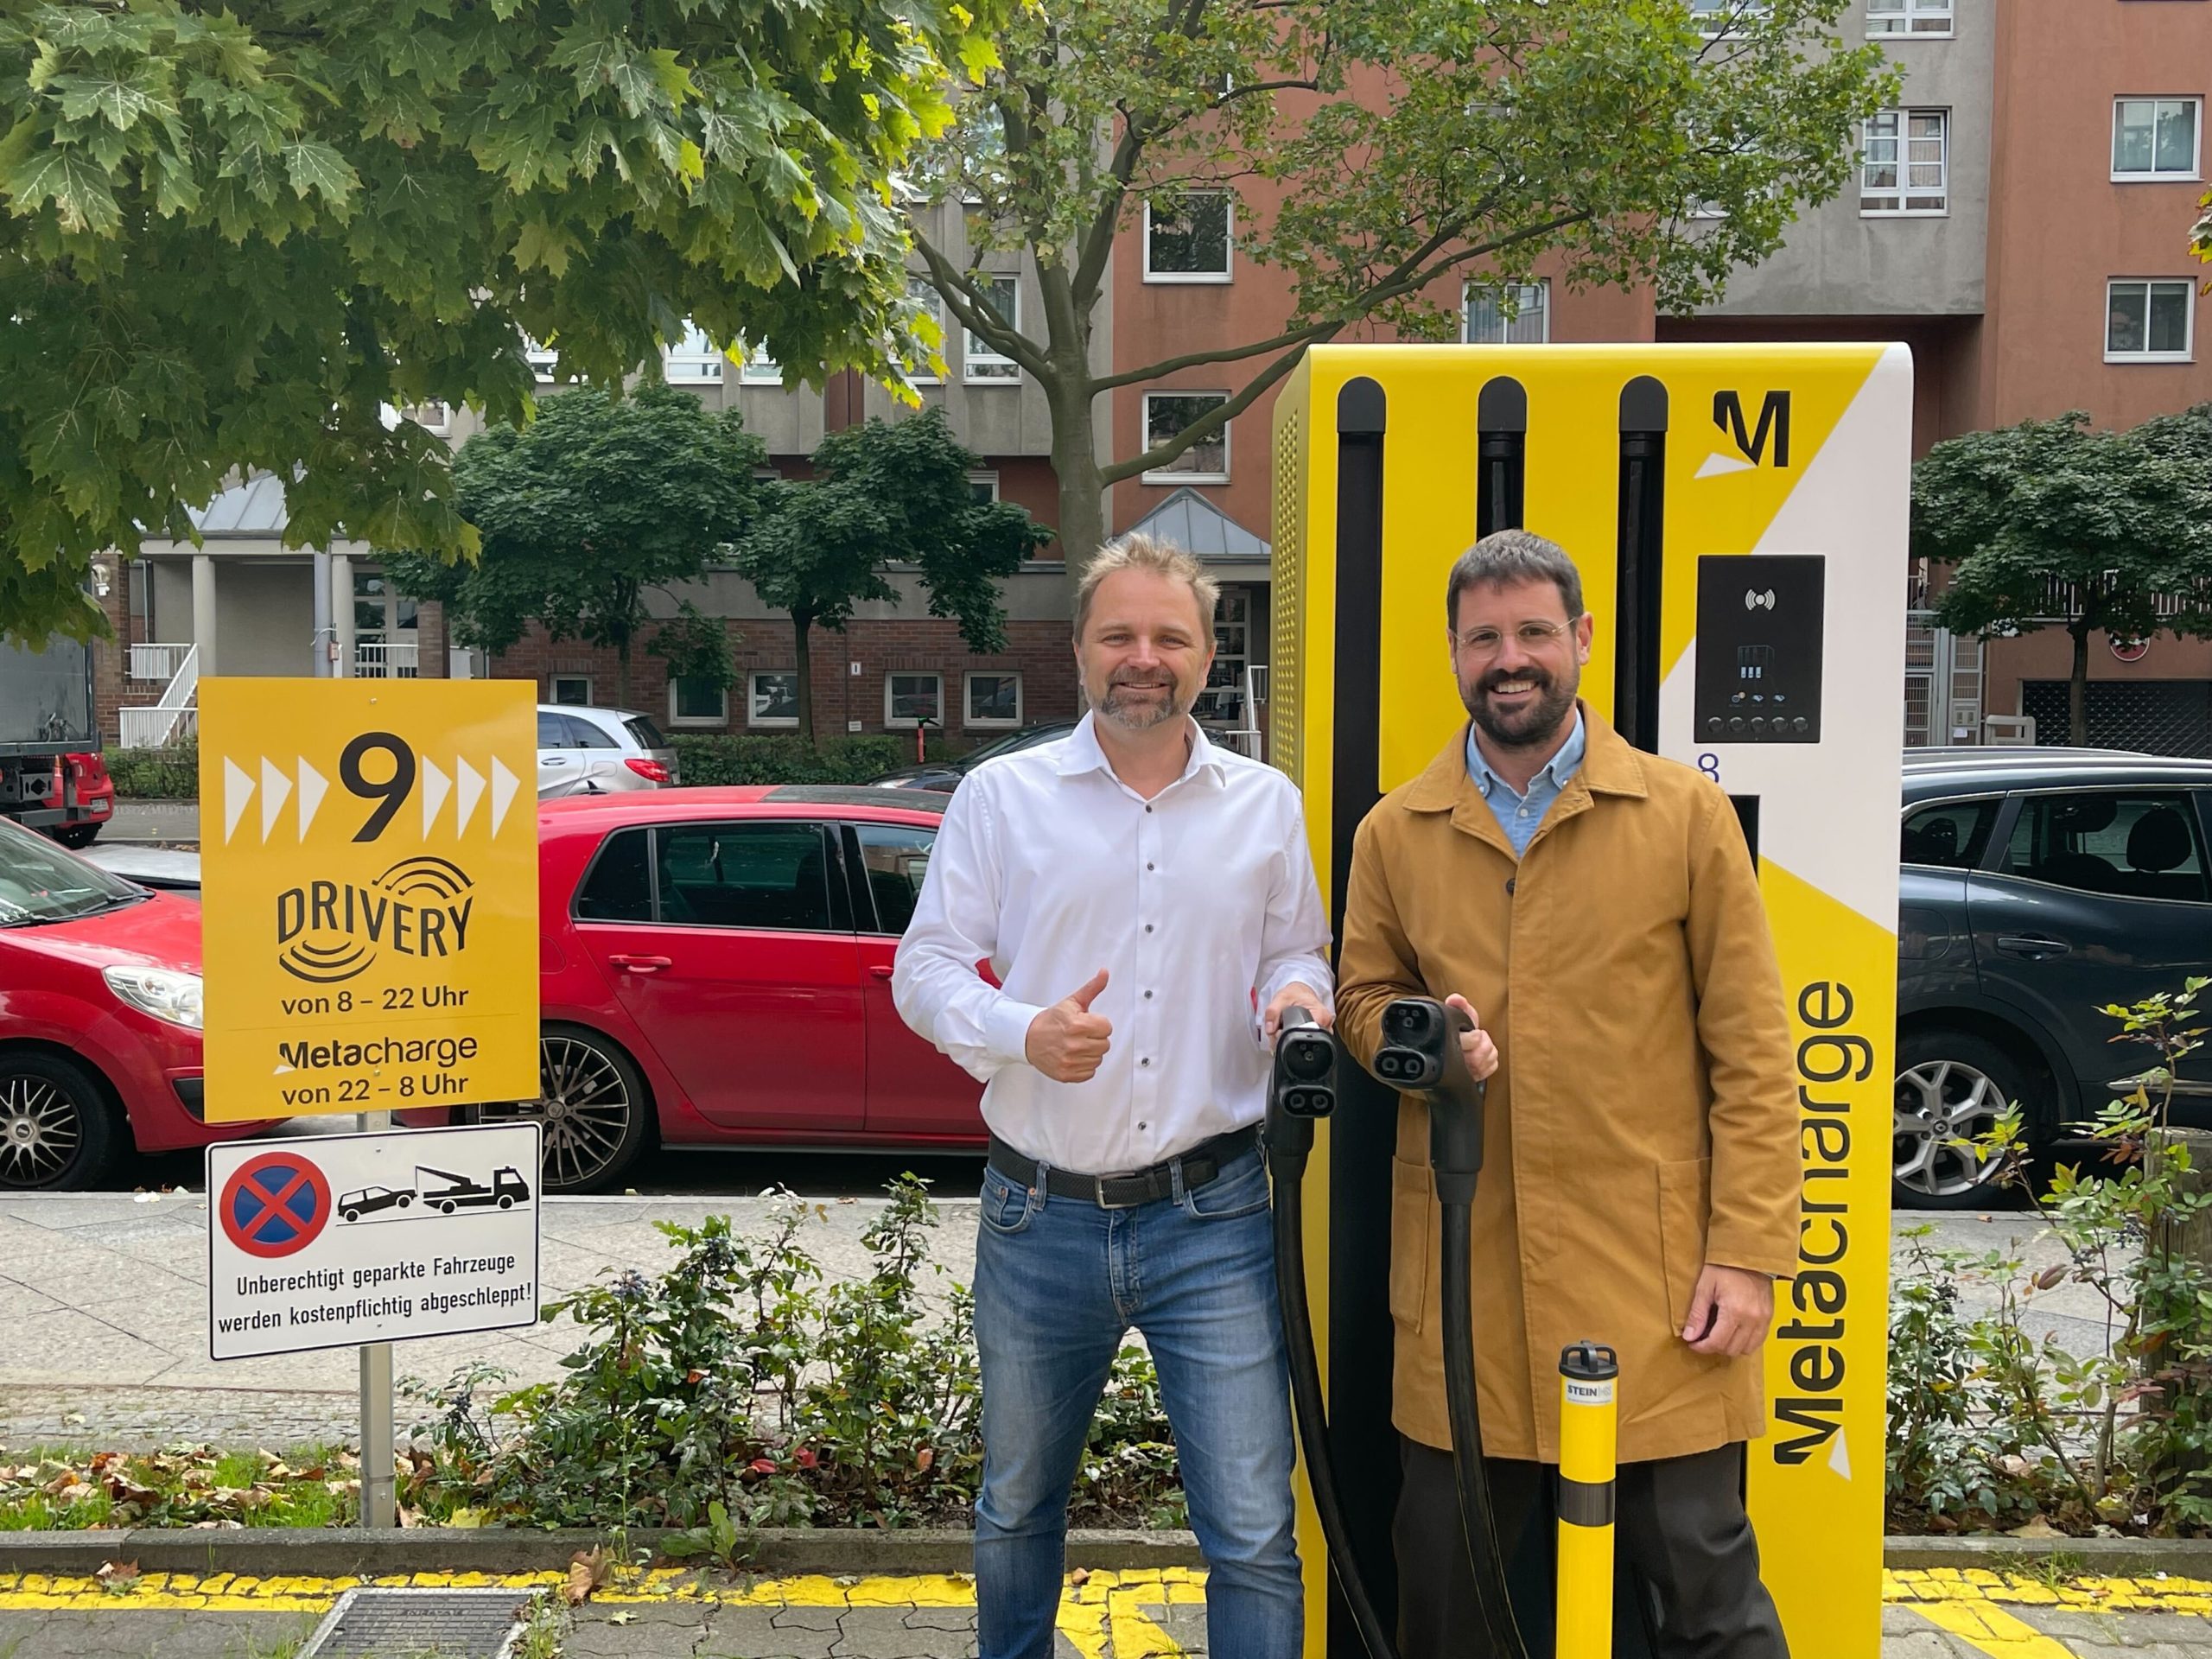 EV Fast Charging for Businesses Metacharge and EVTEC launch first guaranteed charging service at The Drivery